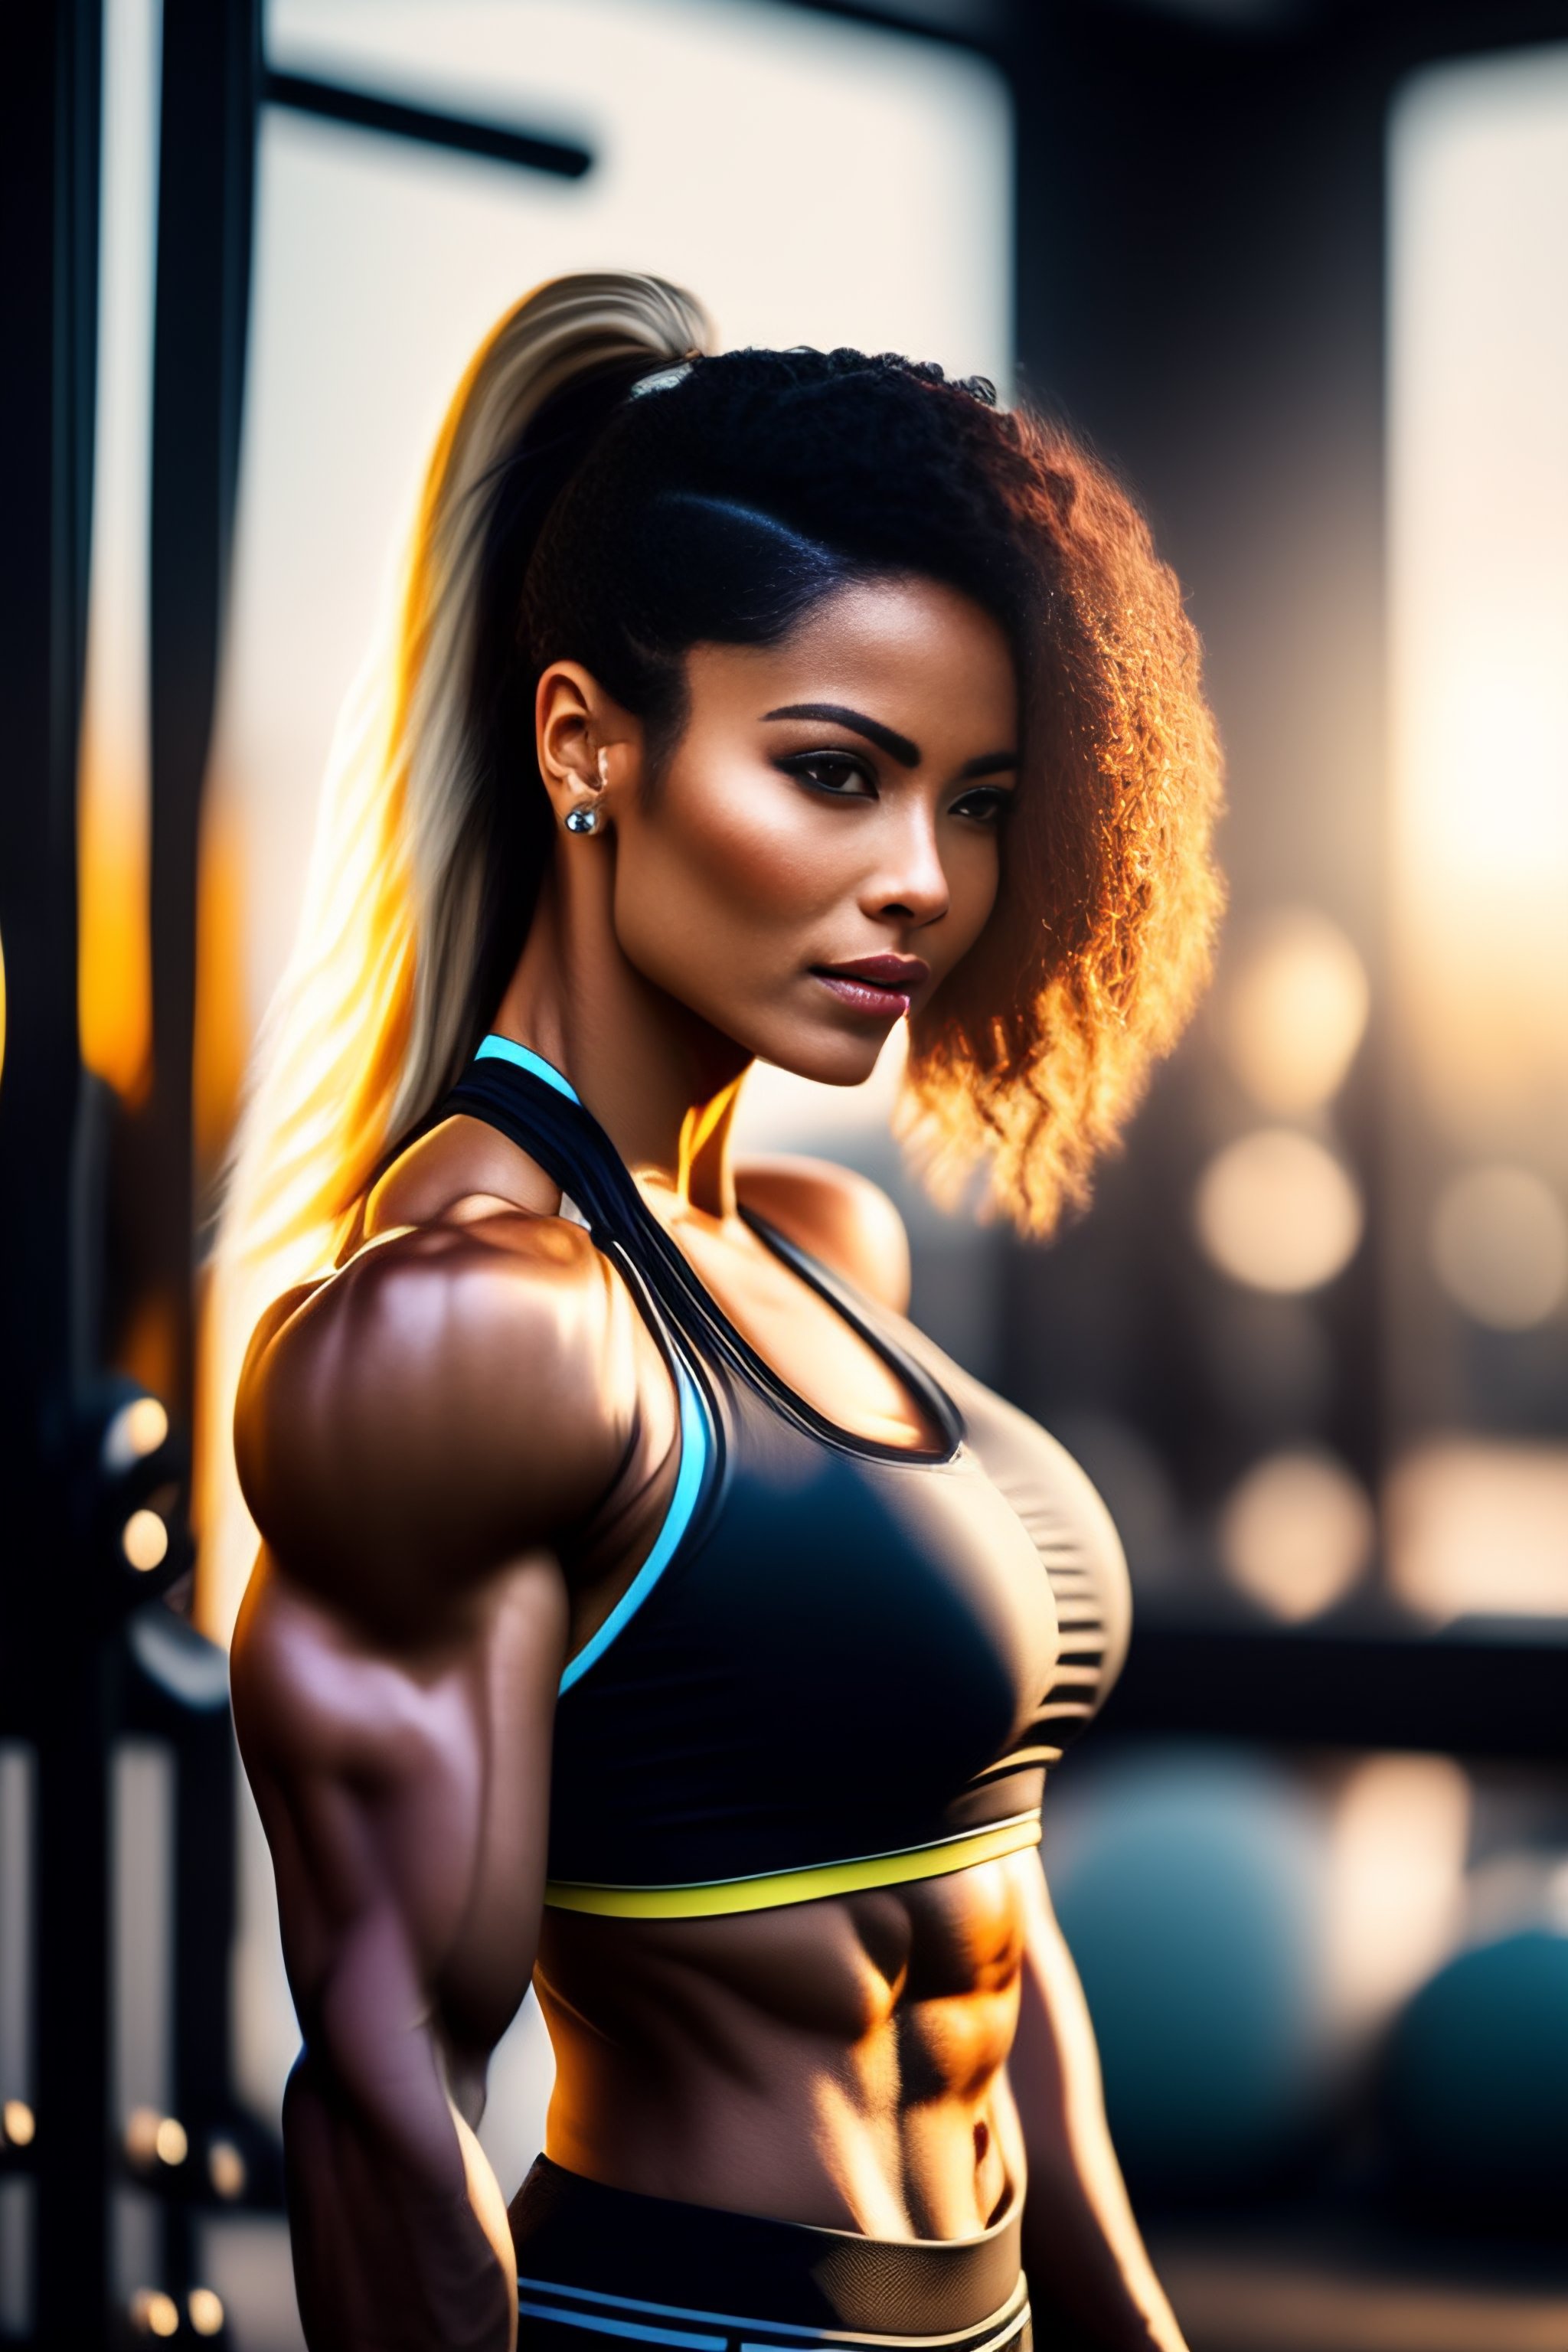 Lexica - Beautiful fit women, fitness attire, facing away from us, 5 5 mm